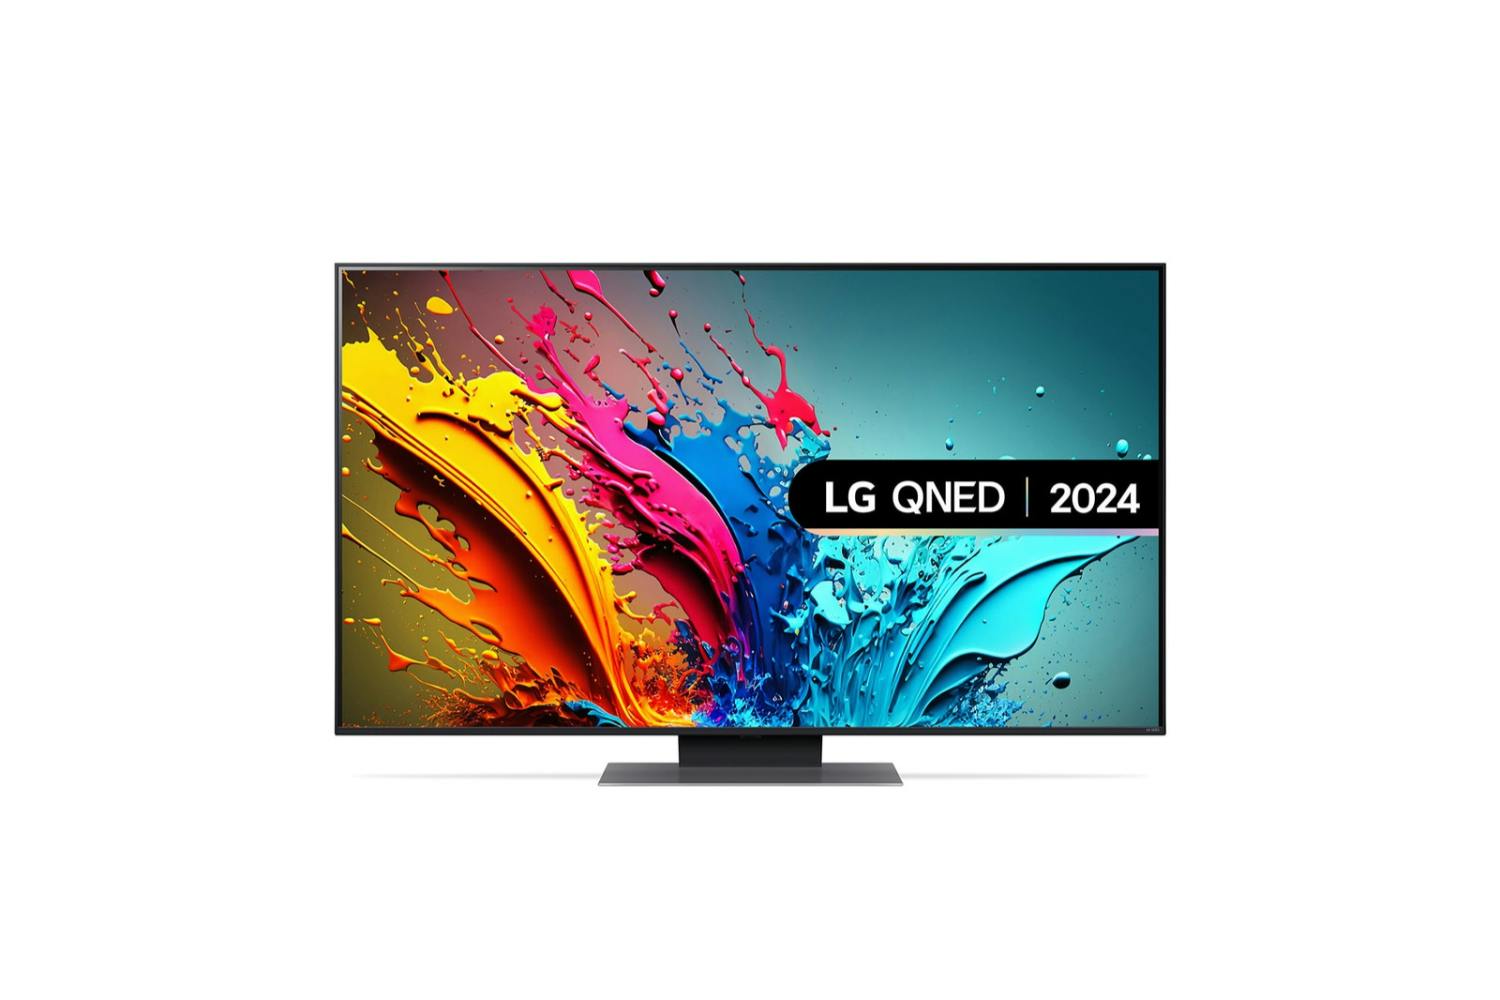 LG 65" QNED80 4K Smart TV | 65QNED80T6A.AEK